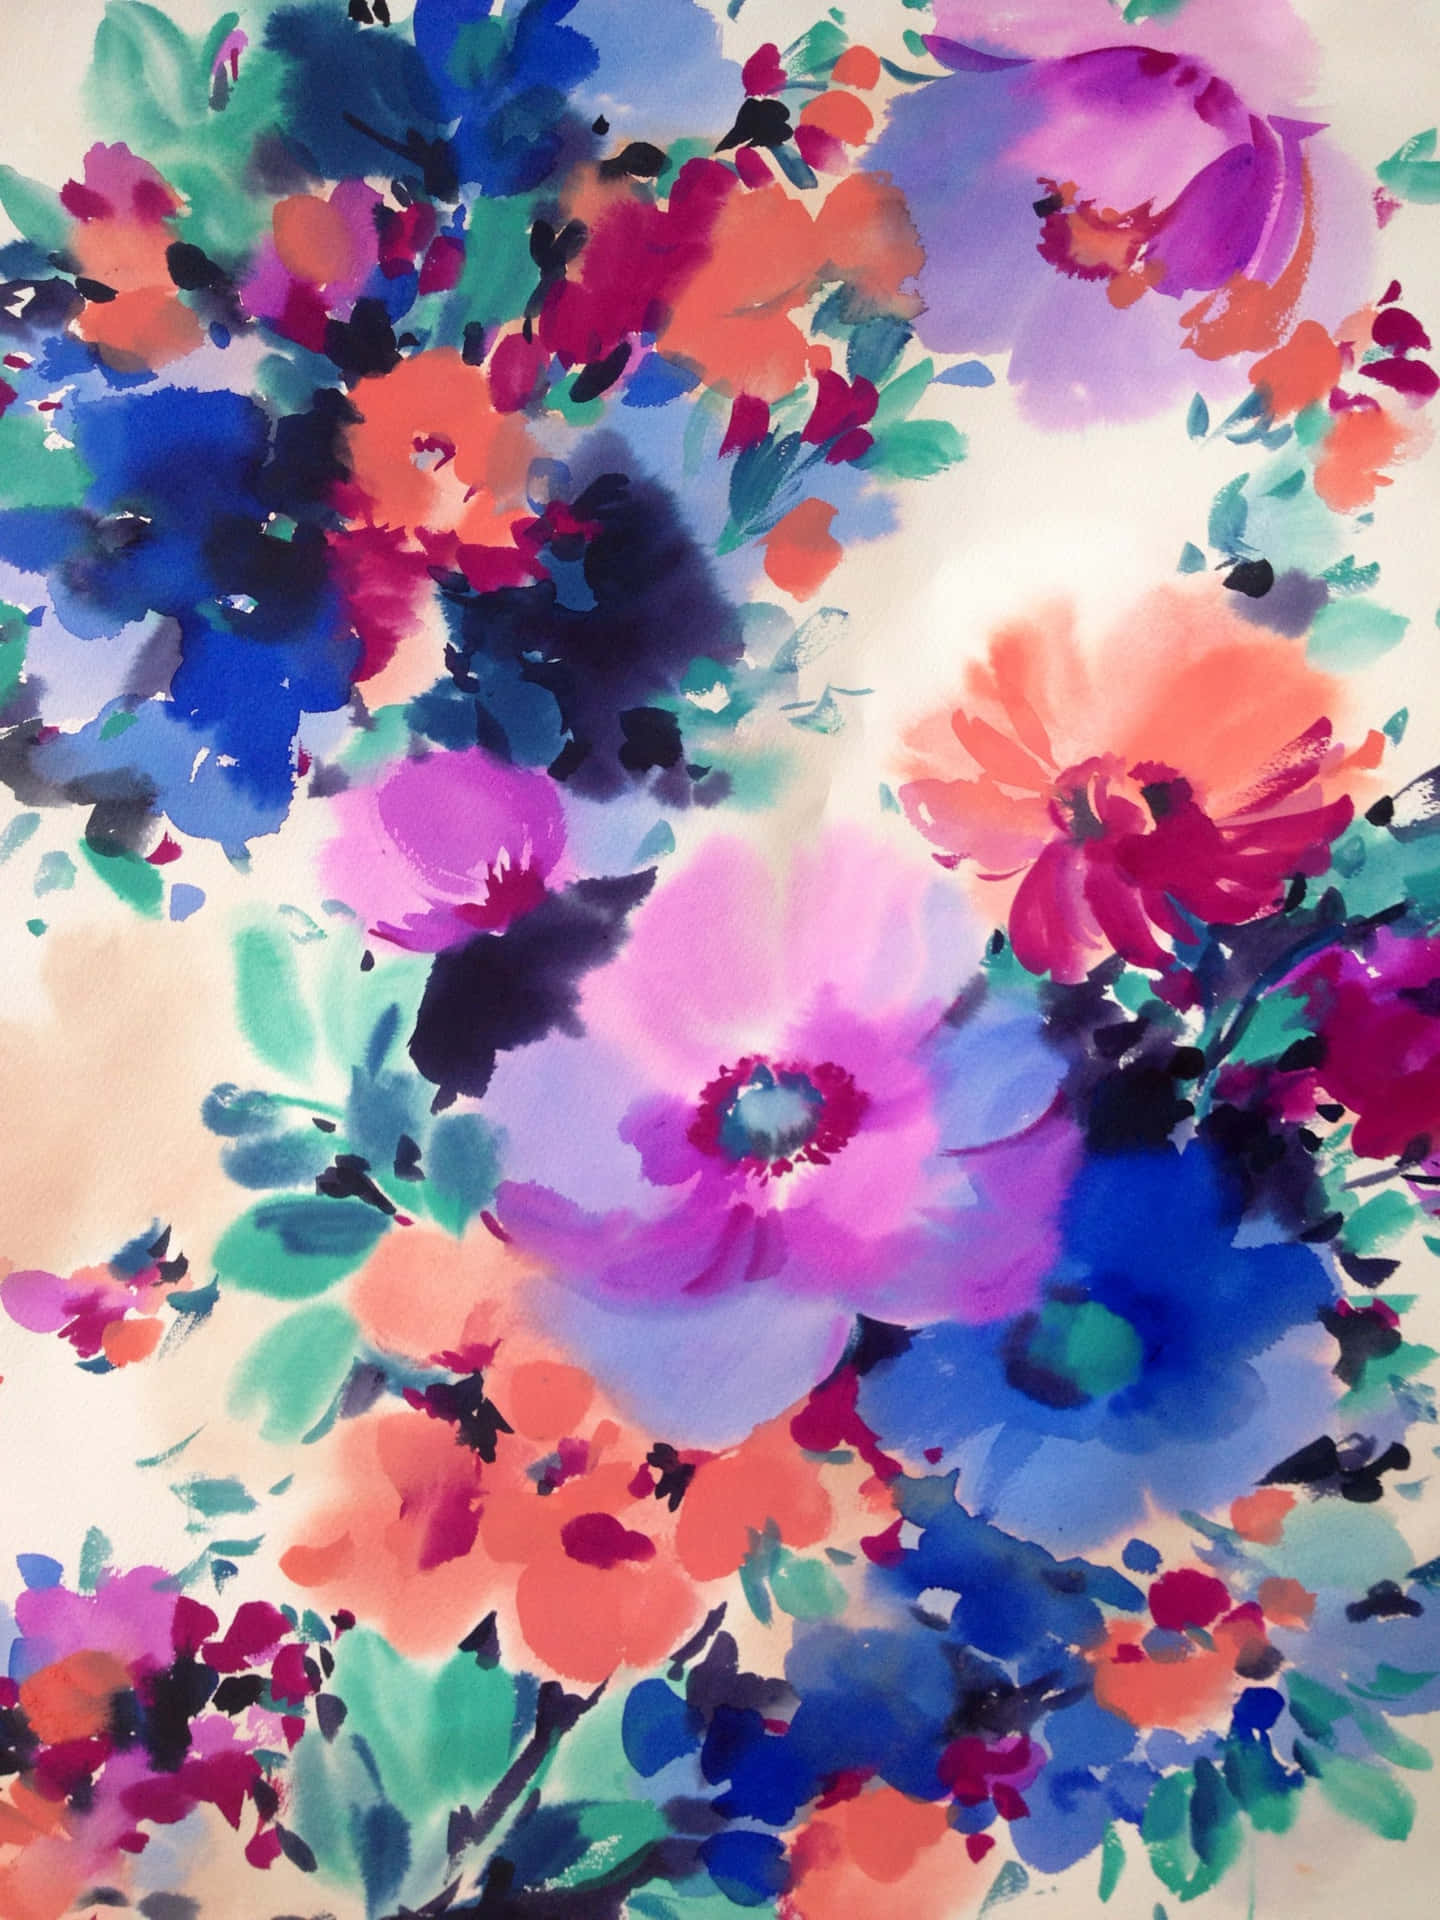 A colorful, hand-painted watercolor background